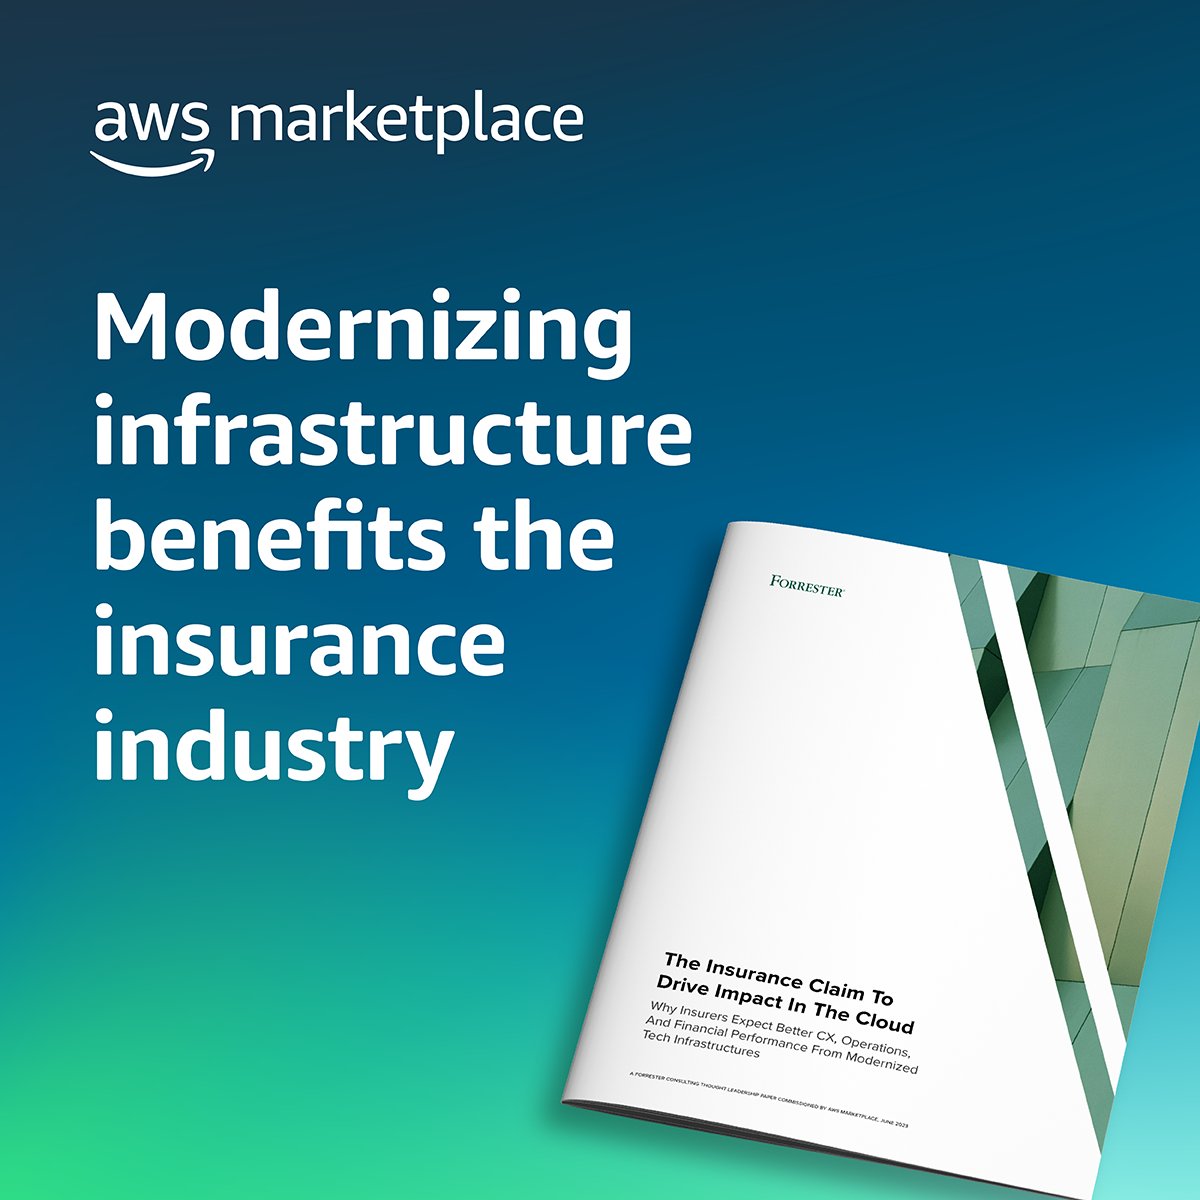 #Insurance providers: Whether you’re looking to automate processes and workflows or drive growth through innovation, look to the #cloud. Are you ready to learn more? Download the ebook now: go.aws/3IdopgW